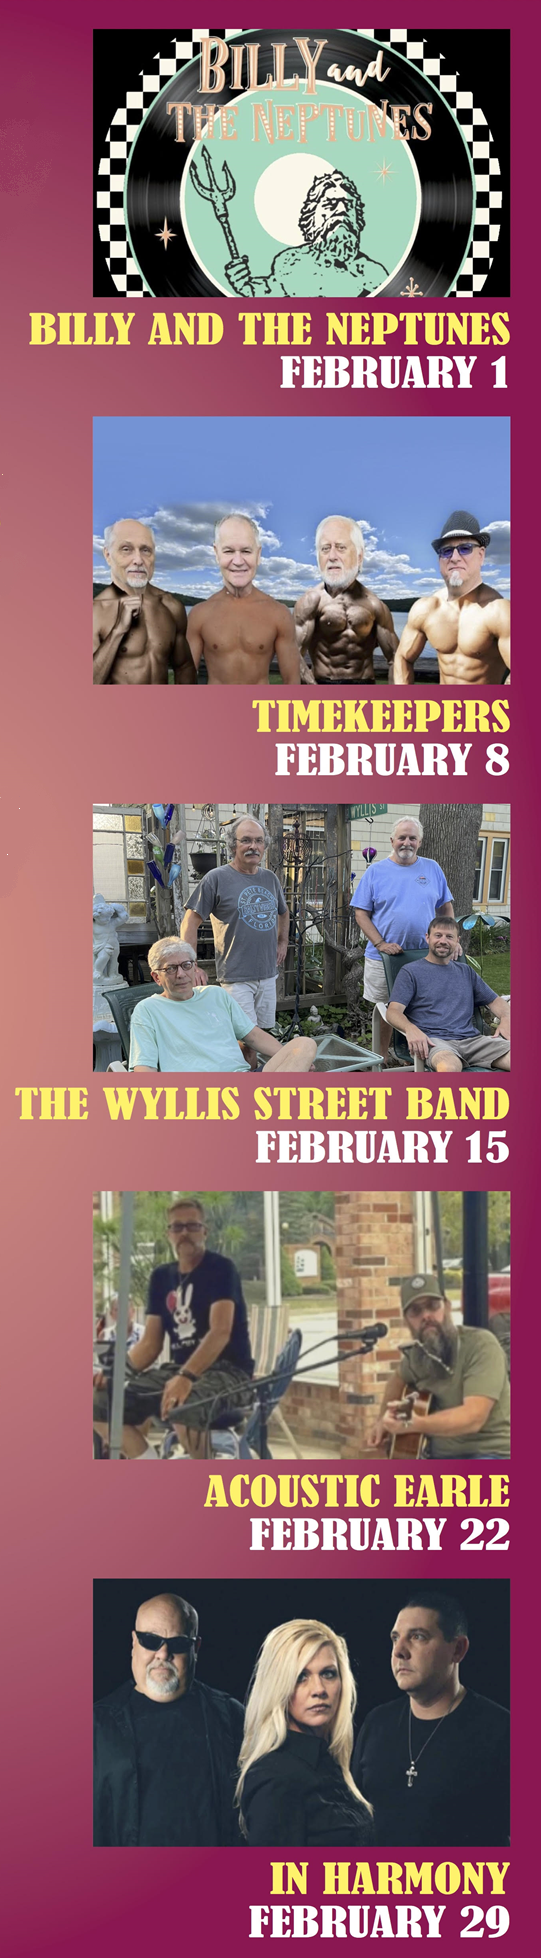 Billy and the Neptunes February 1. Timekeepers February 8, The Wyllis Street Band February 15, Acoustic Earle February 22, In Harmony February 29 for Billy's has Karma Concert Series February, 2024!